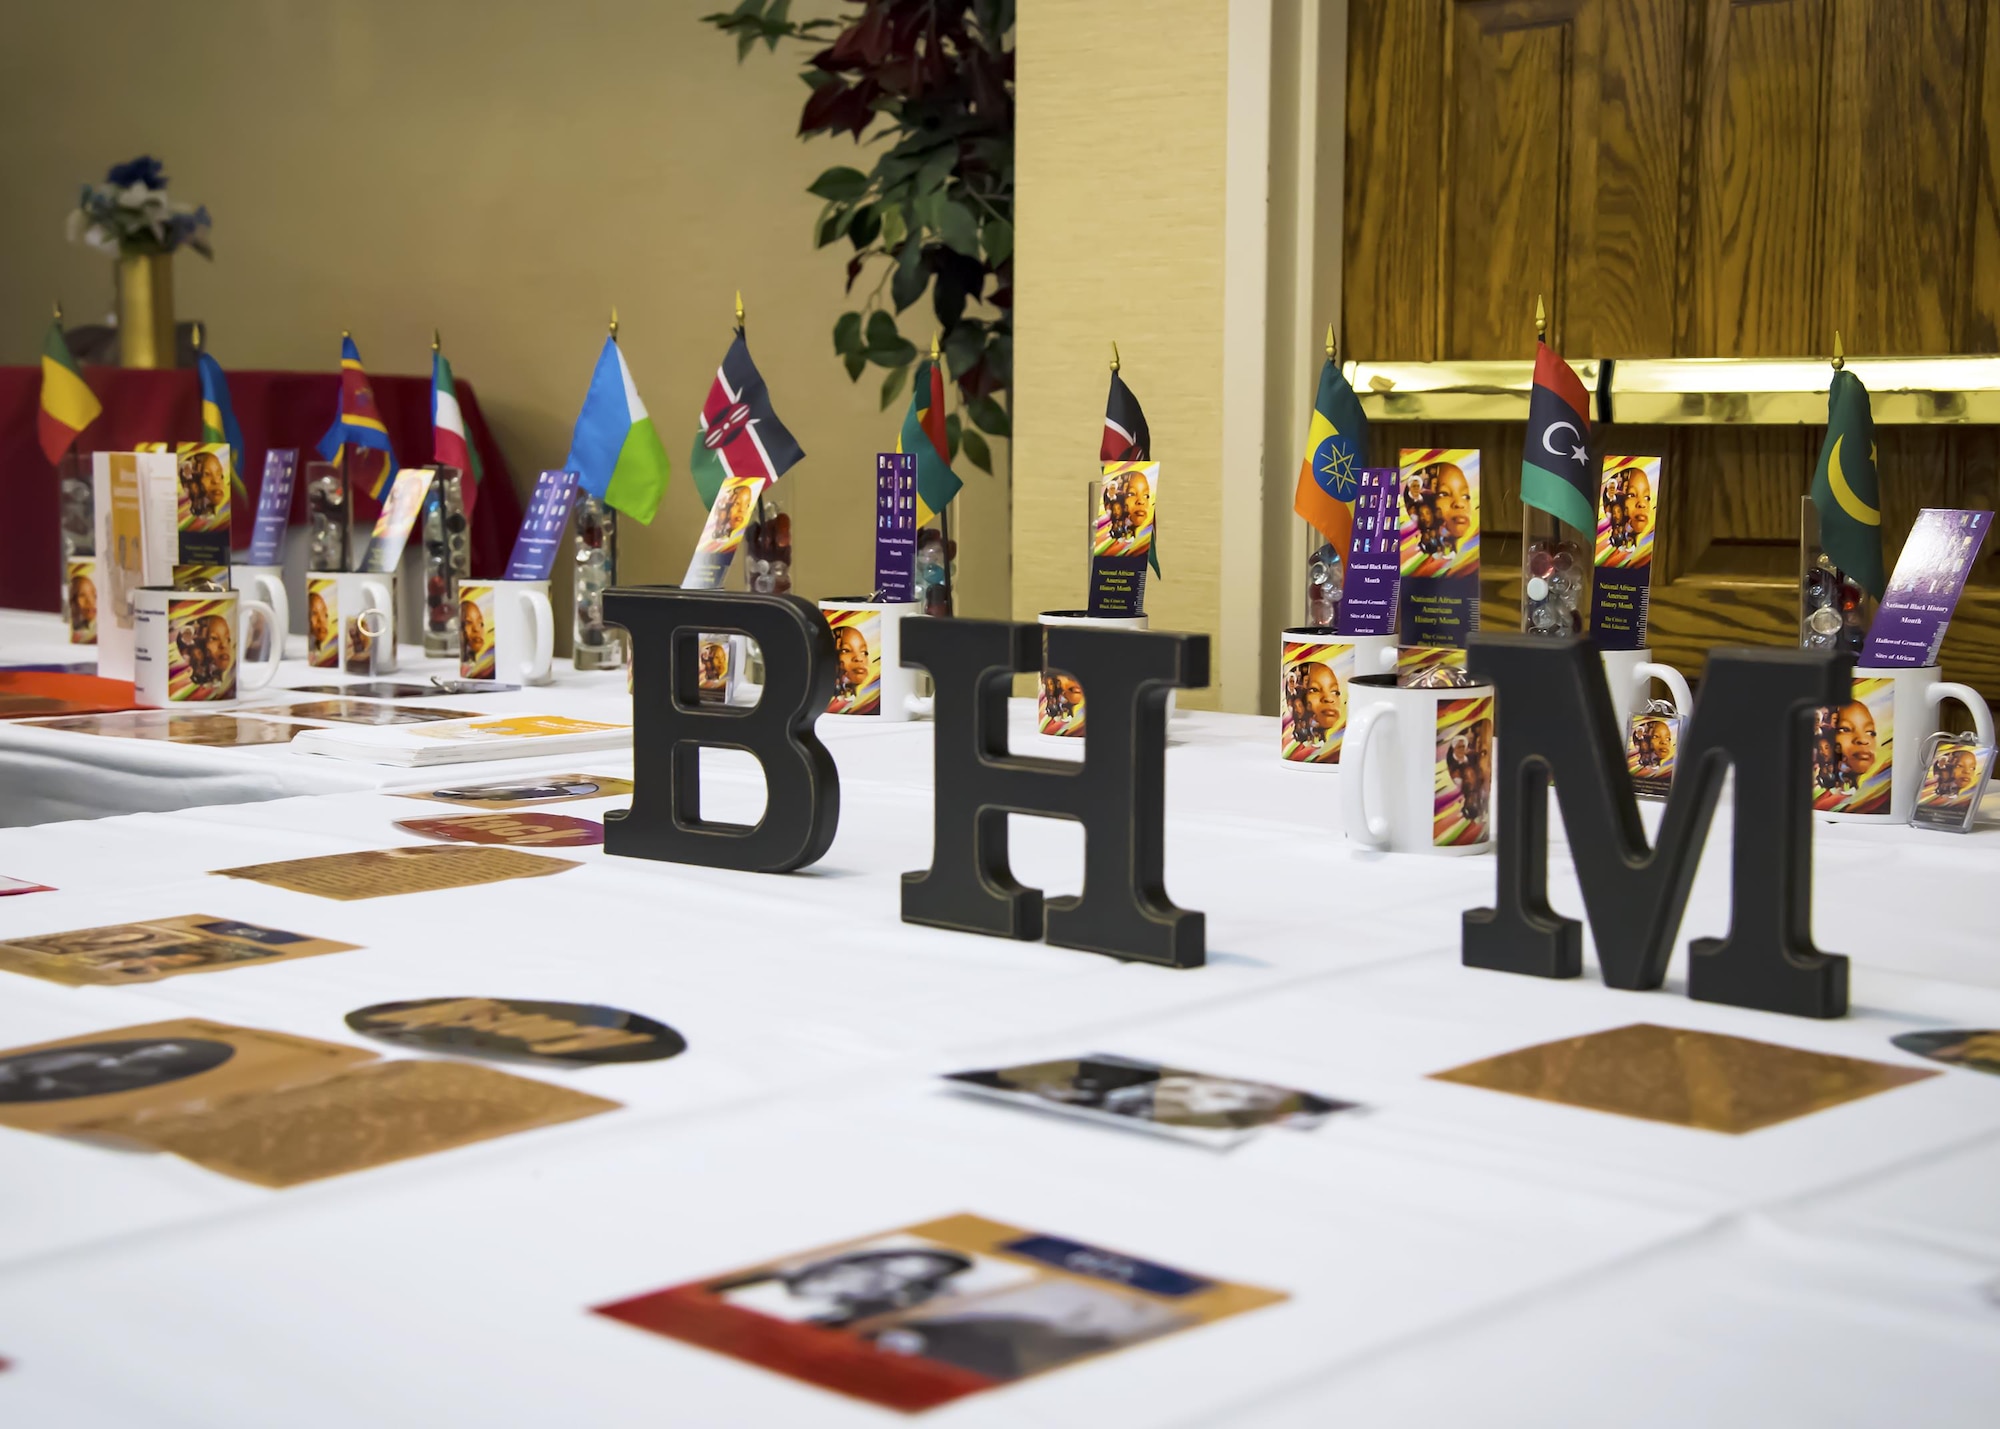 A Black History Month display rests on a table during Diversity Day, Sept. 29, 2017, at Moody Air Force Base, Ga. Moody held Diversity Day to honor and educate Airmen on all of the ethnic groups and organizations observed by the Department of Defense. (U.S. Air Force Photo by Airman Eugene Oliver)